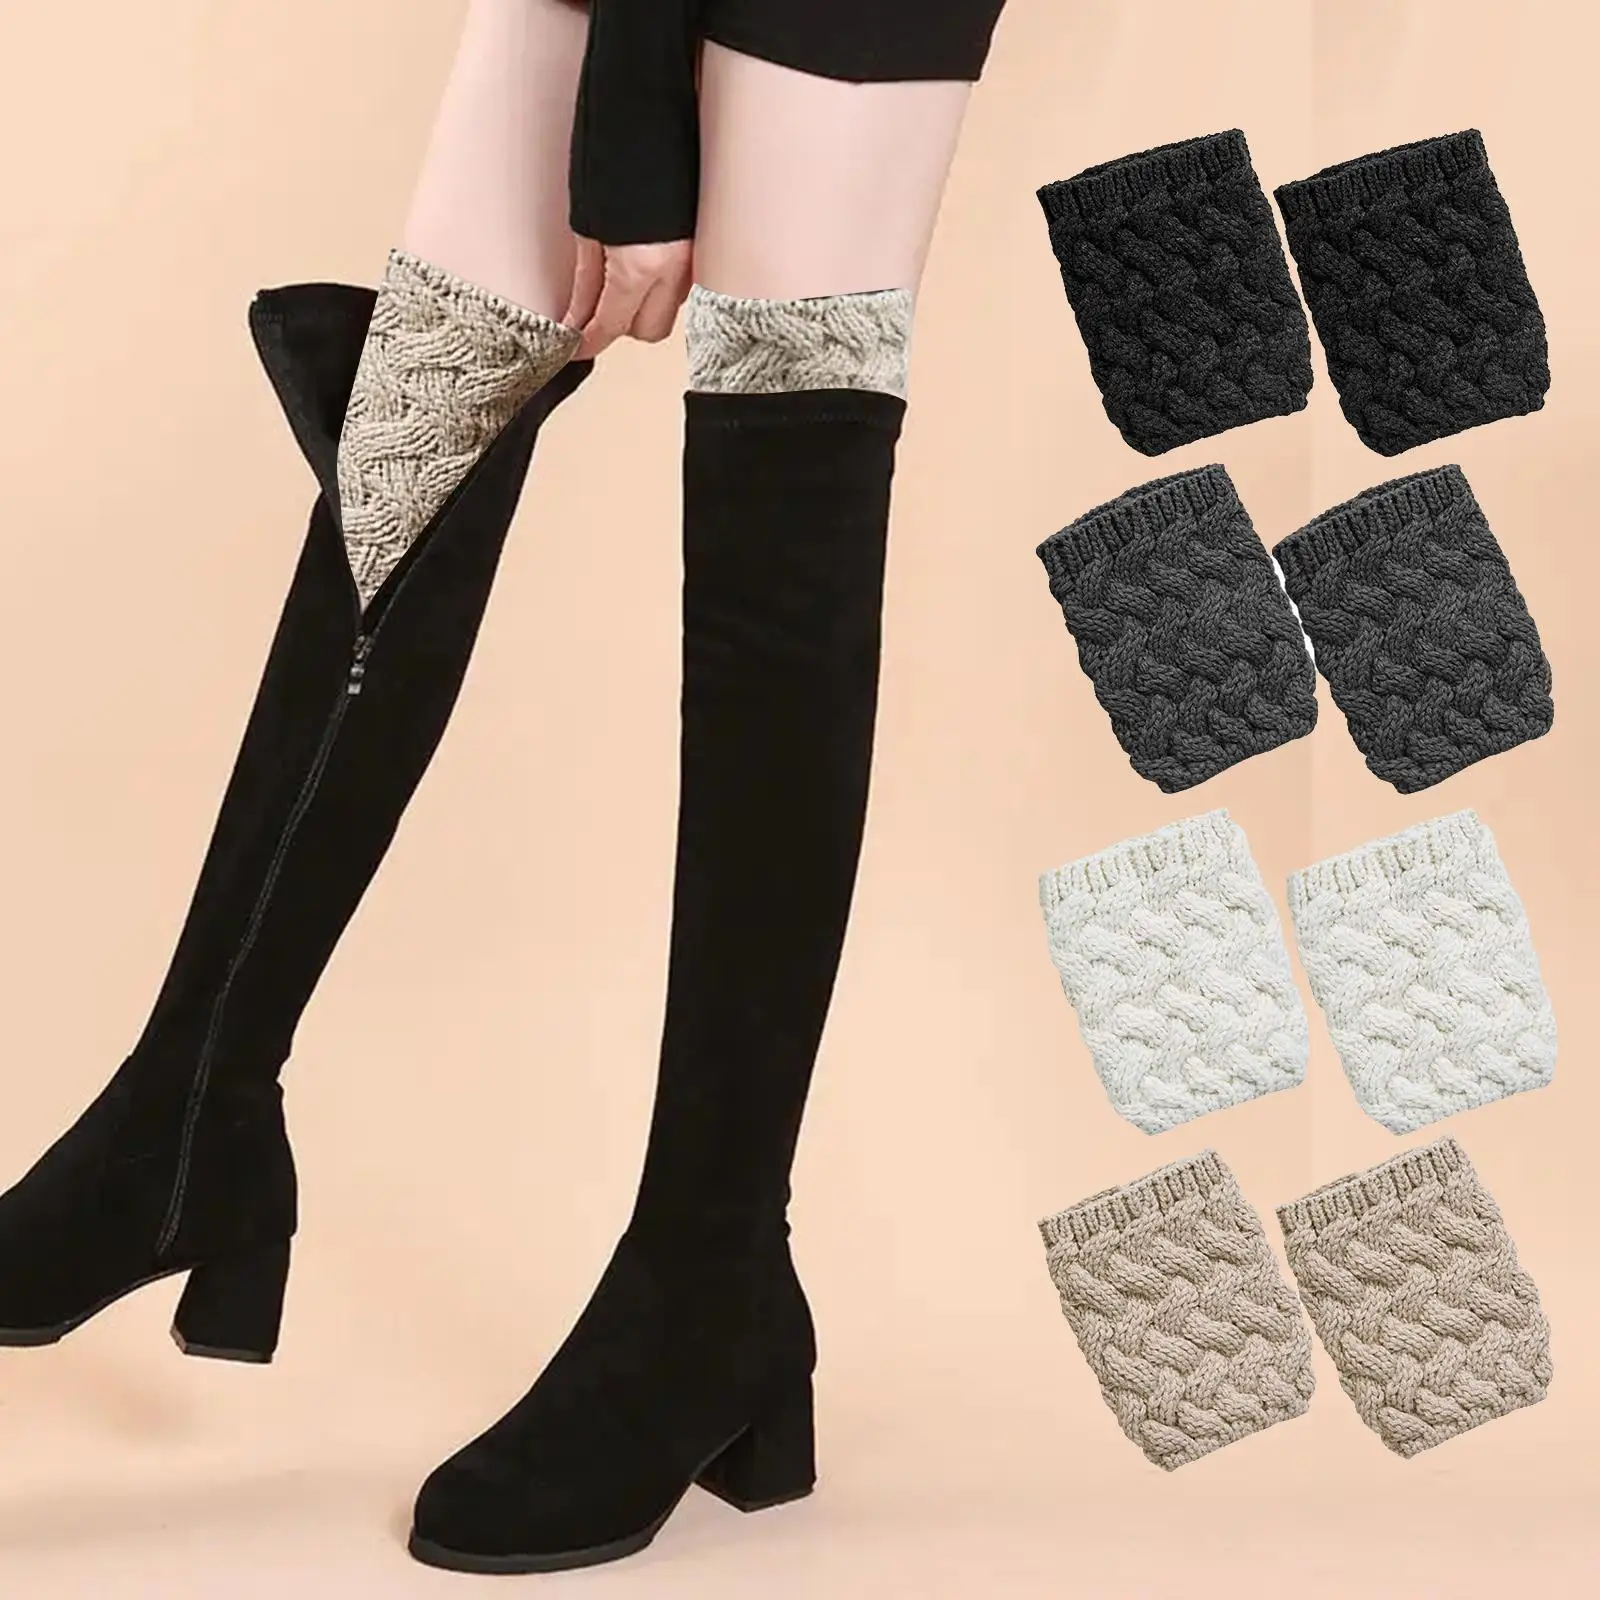 4 Pairs Womens Boot Cuffs Cable Knit Boot Socks Boot Toppers Winter Short Boot Accessories Acrylic Fibers Leg Warmers Gifts